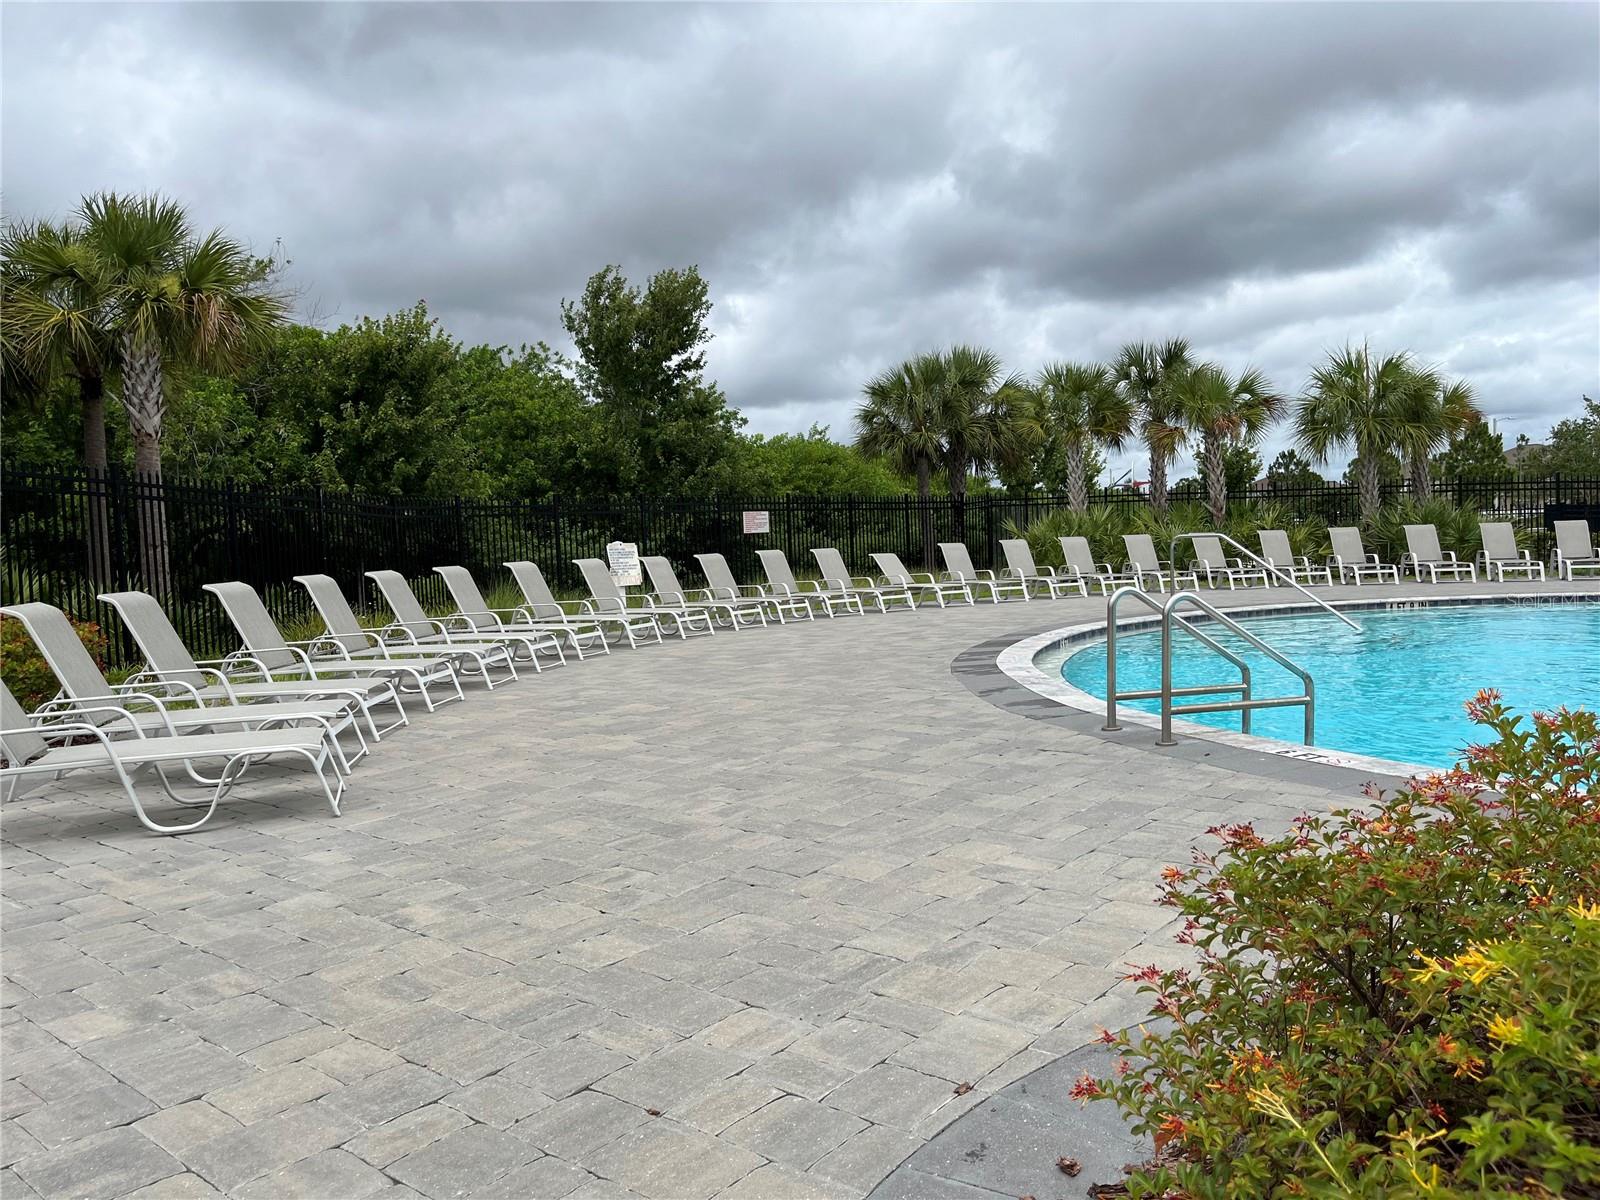 Plenty of seating throughout the pool area